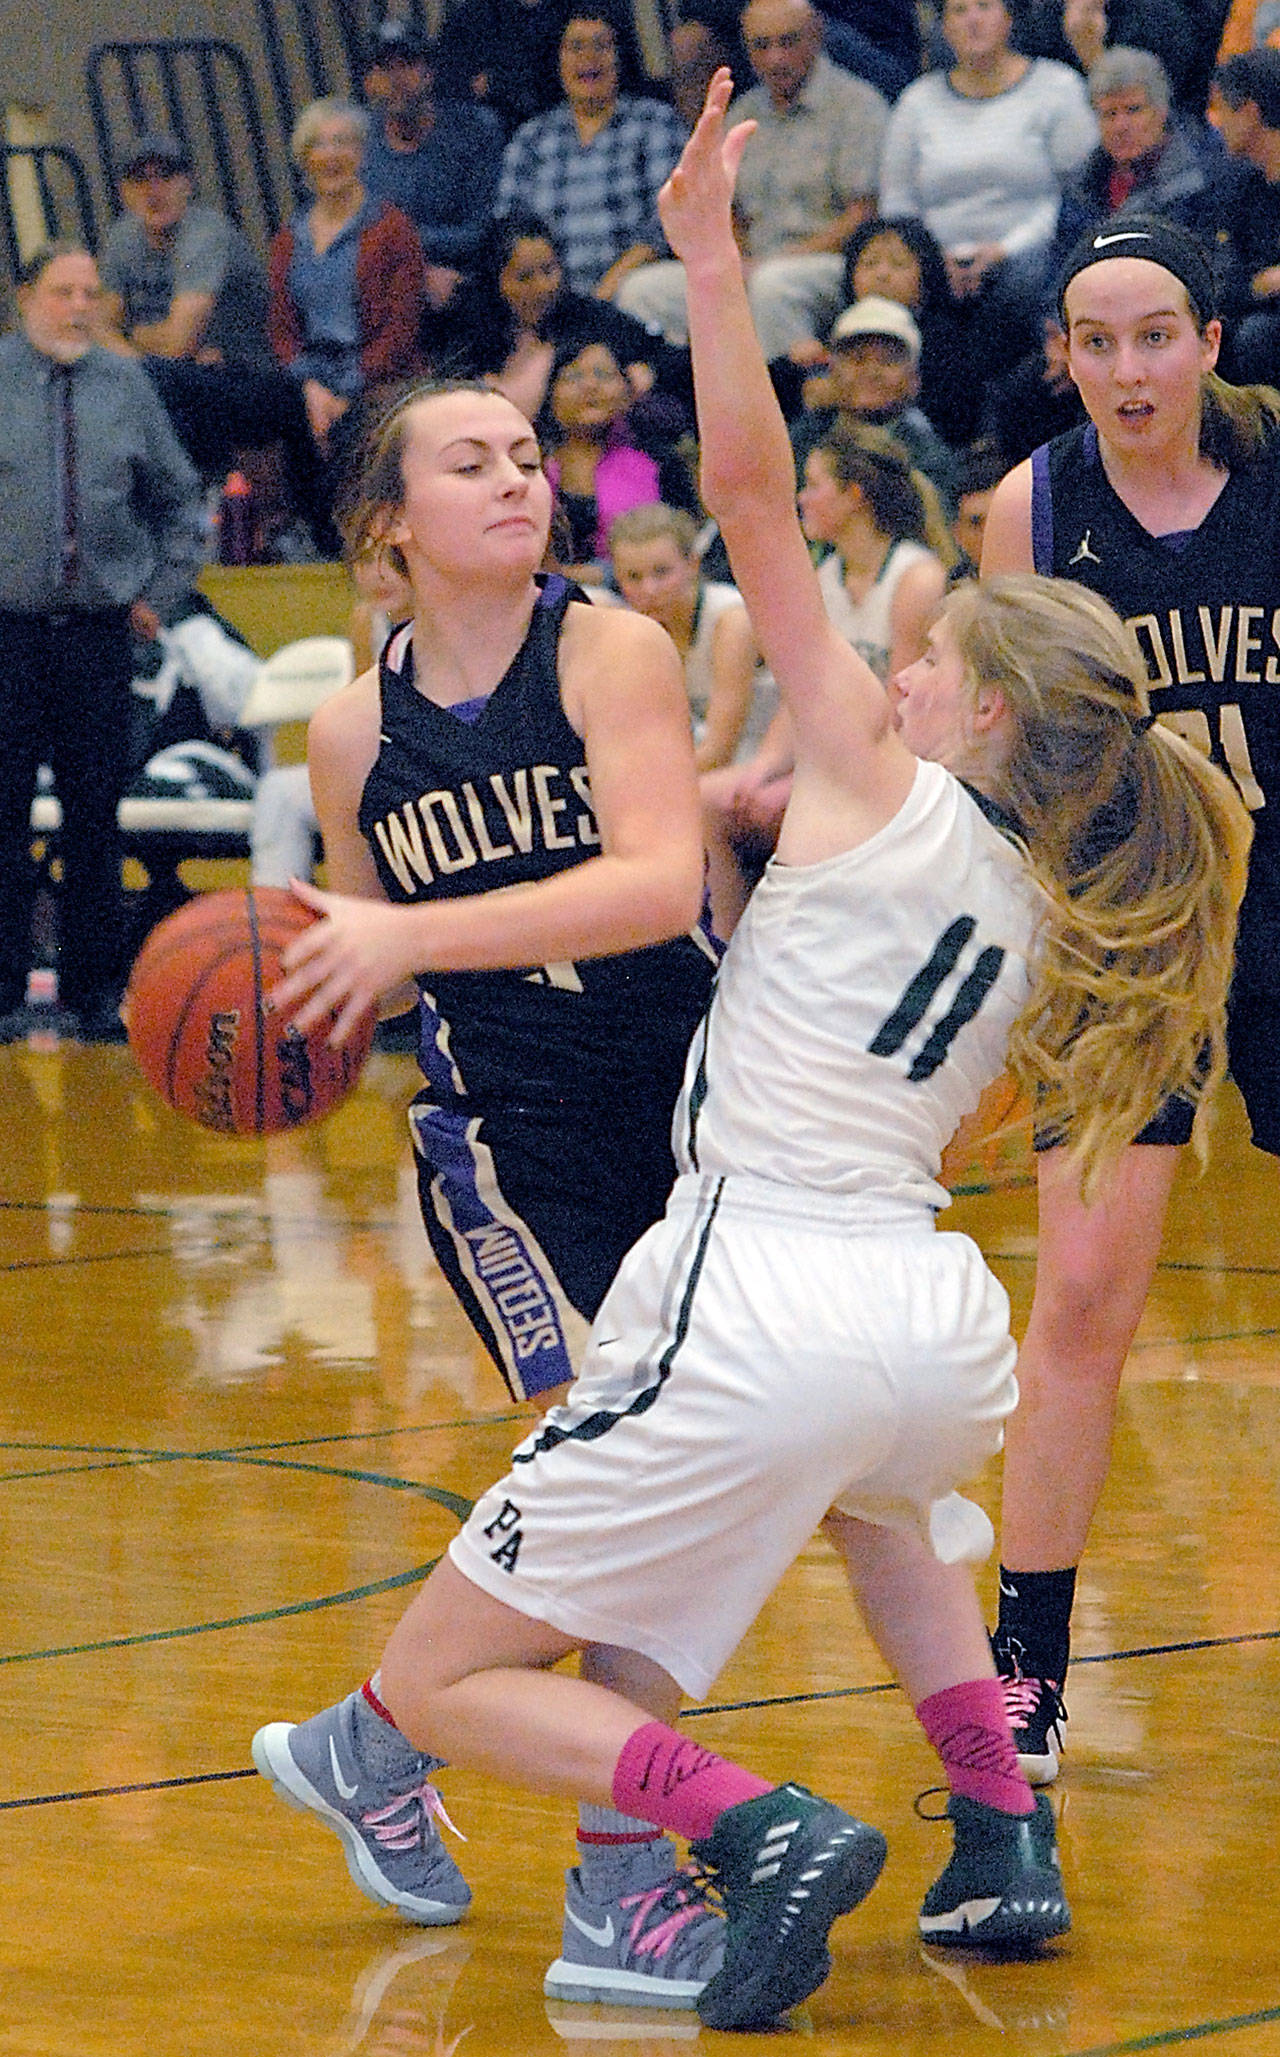 Keith Thorpe/Peninsula Daily News Sequim’s Bobbi Sparks, left, looks for a way around the defense of Port Angeles’ Millie Long during the third quarter on Tuesday night at Port Angeles High School. Looking on at right is Sequim’s Kalli Wiker.